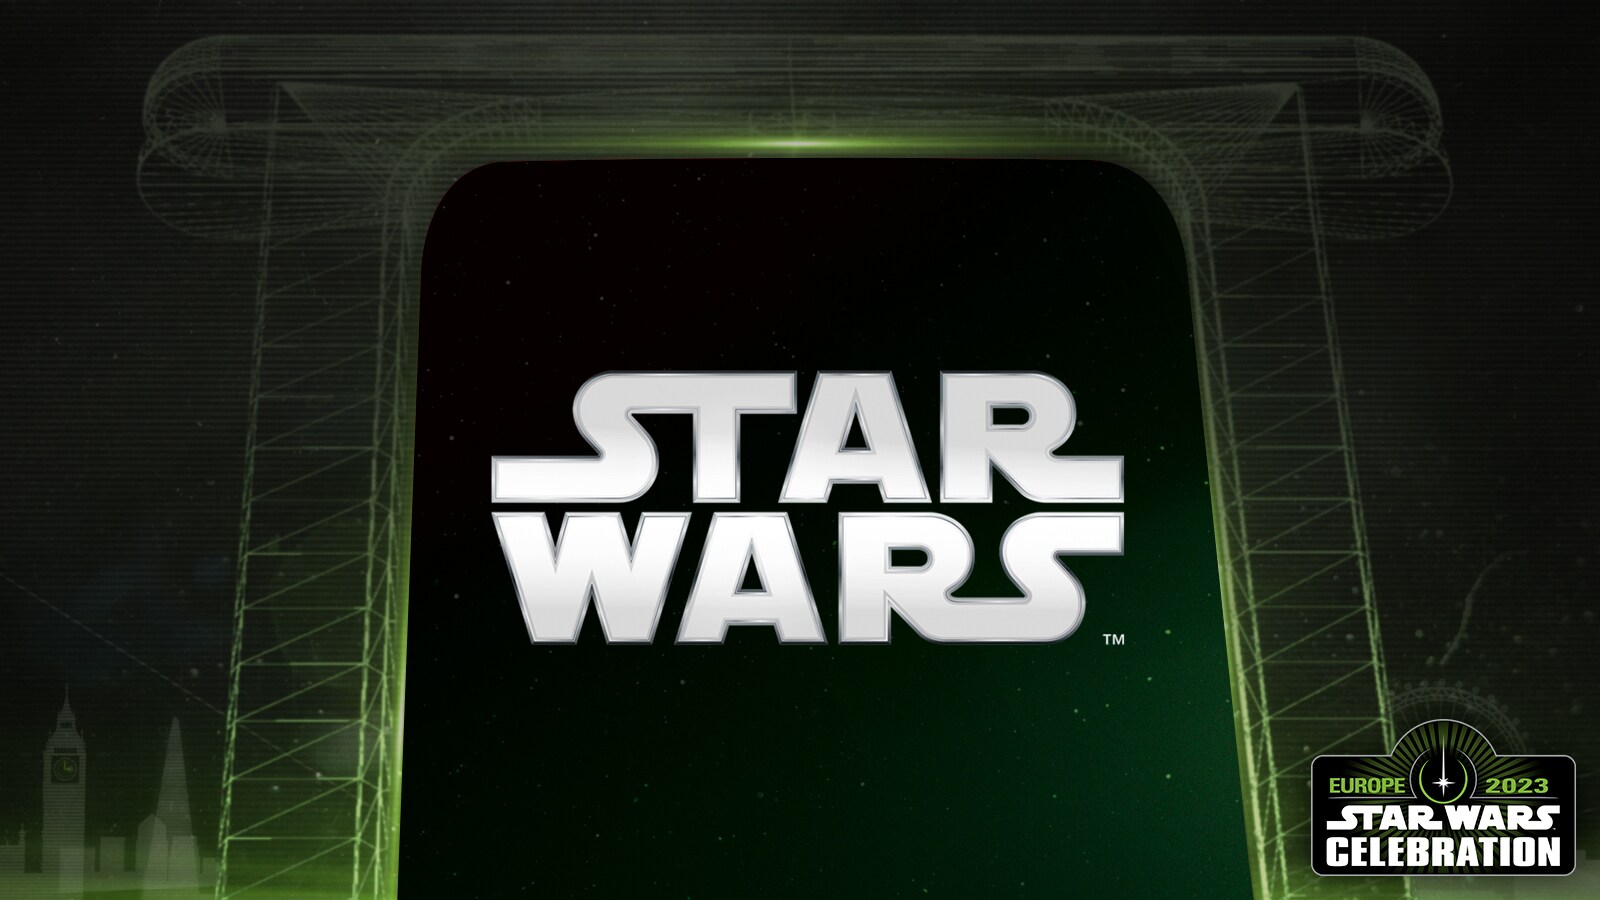 Promotions Watch: Star Wars Nights